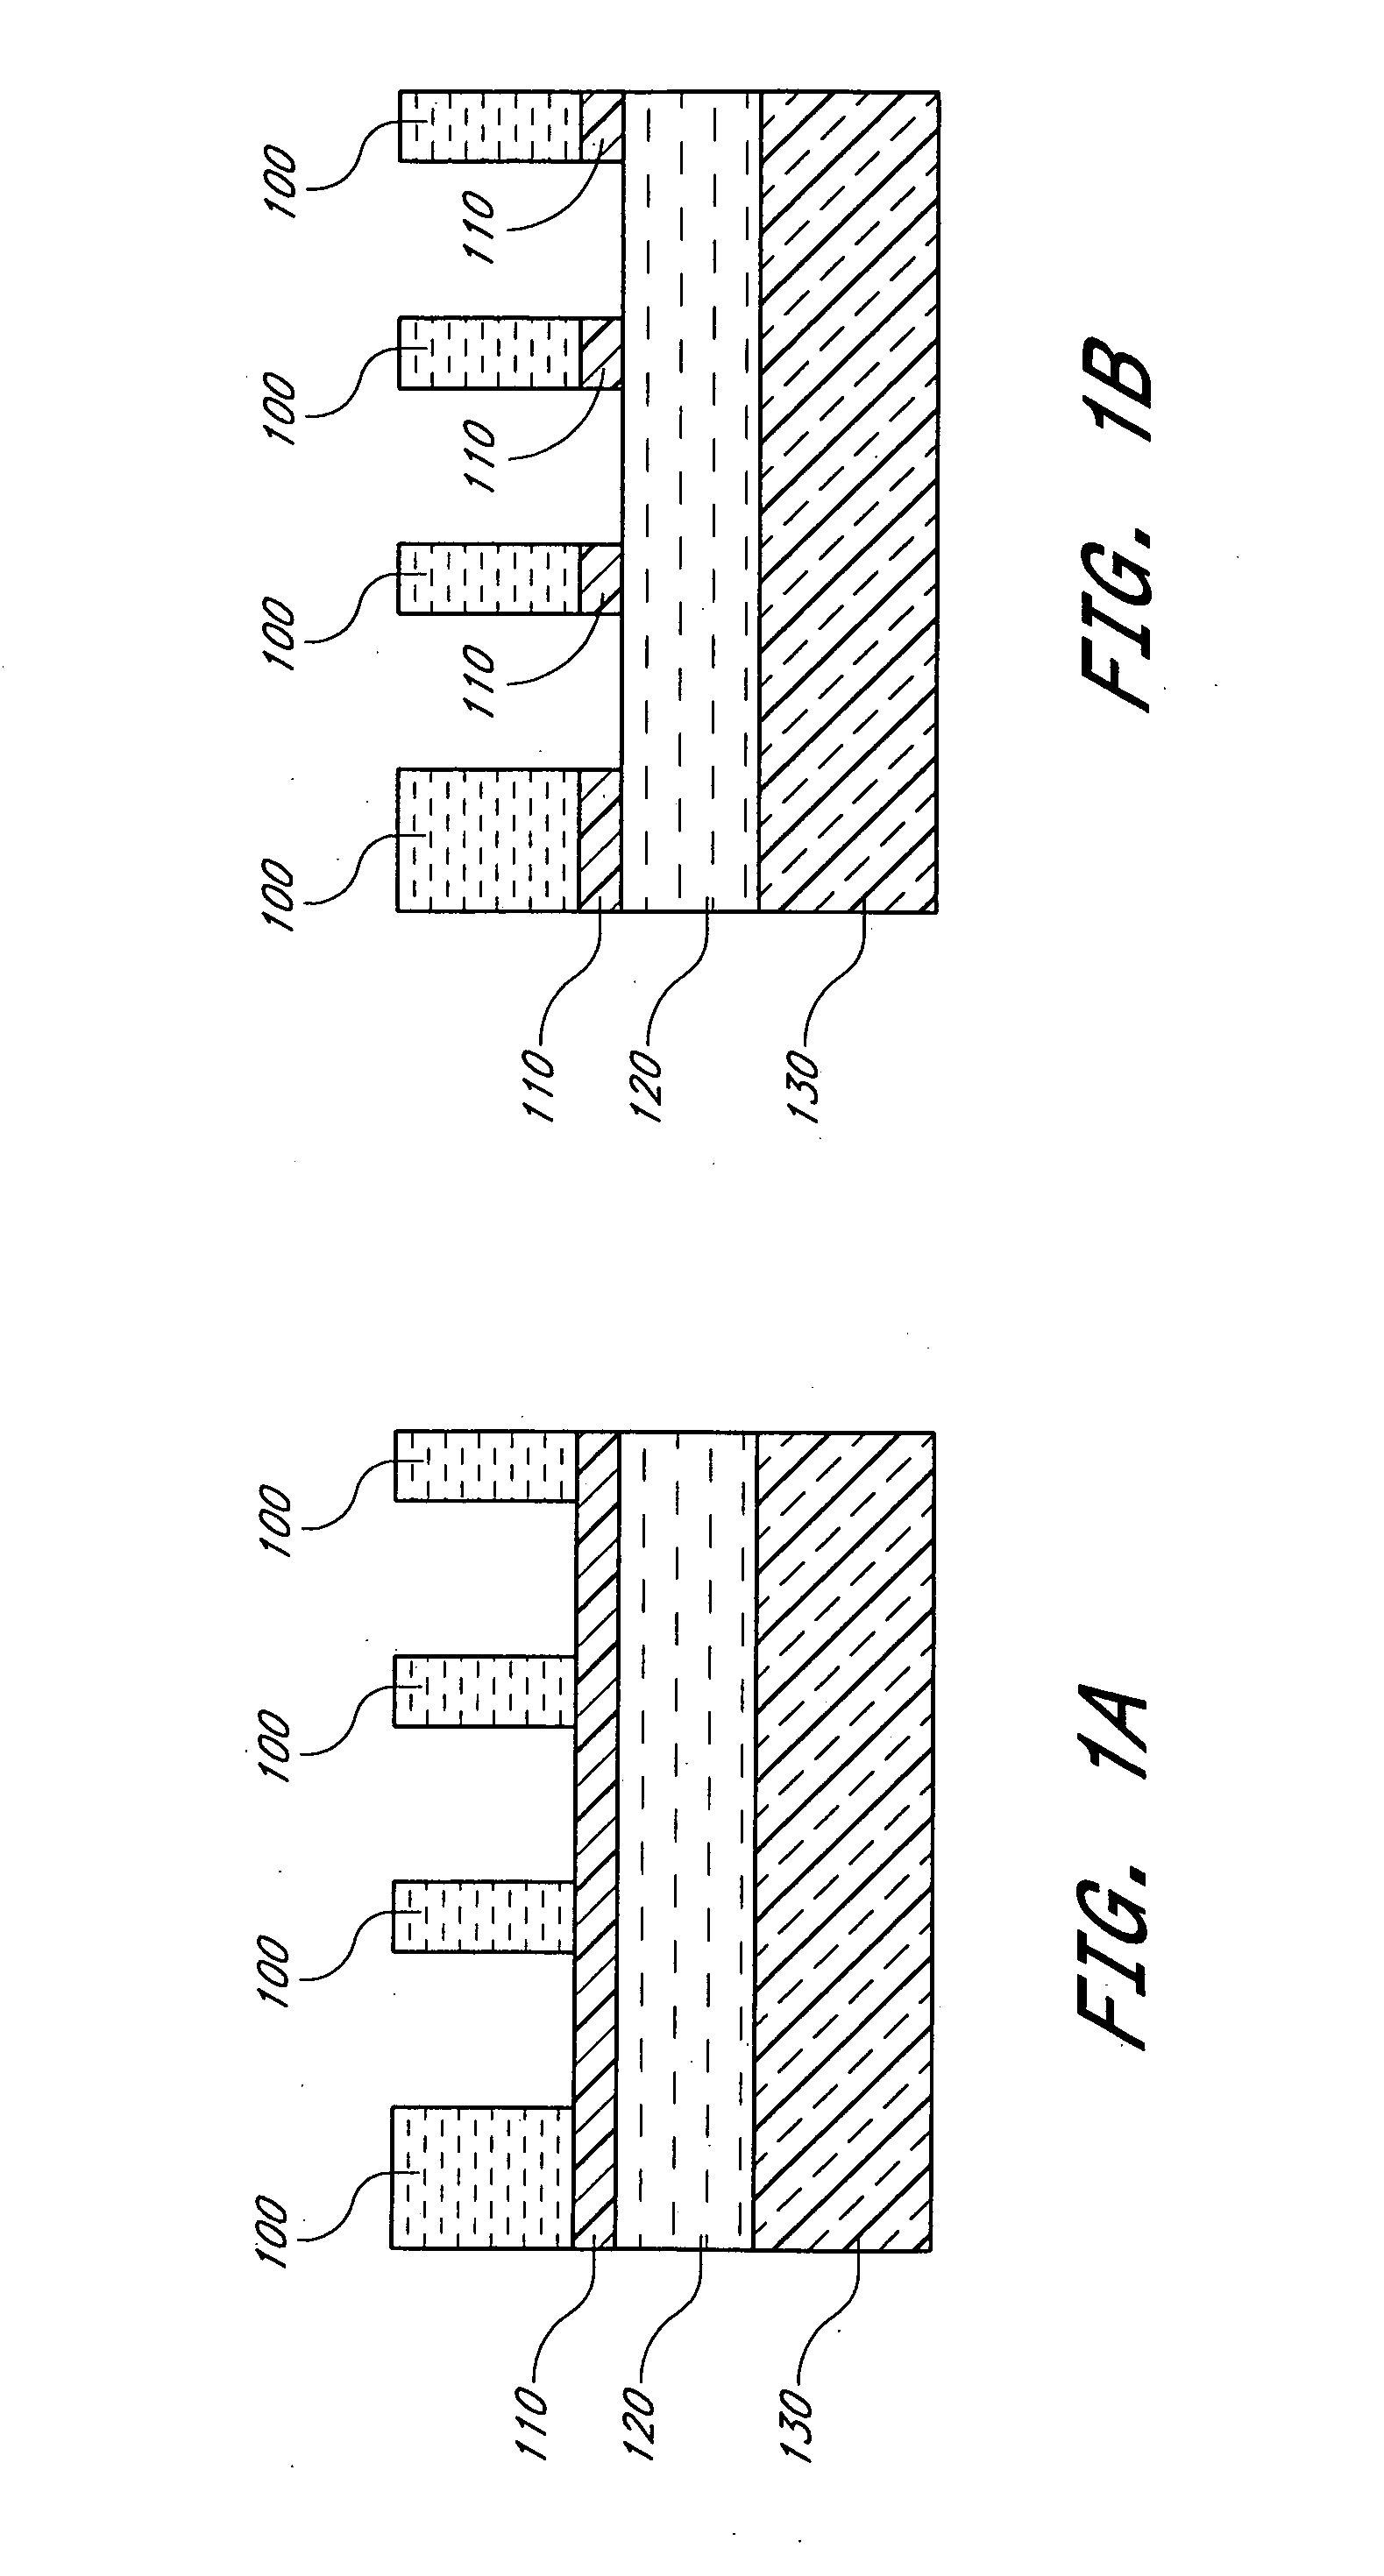 Critical dimension control for integrated circuits